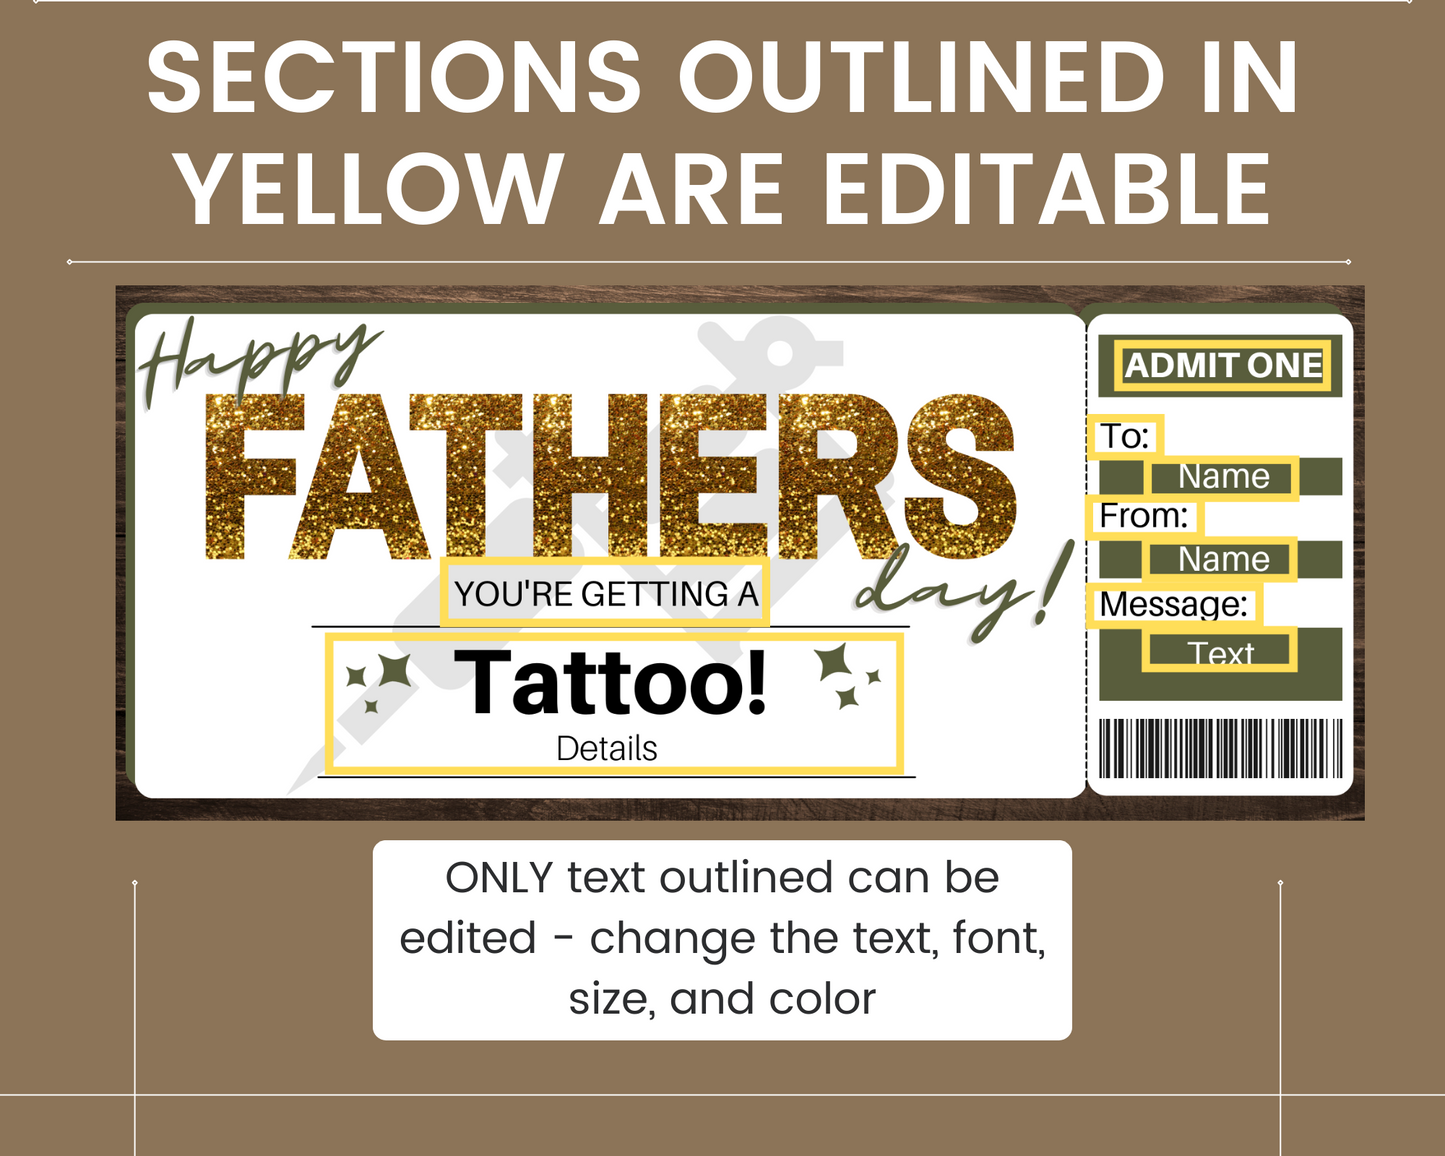 Father's Day Tattoo Gift Certificate